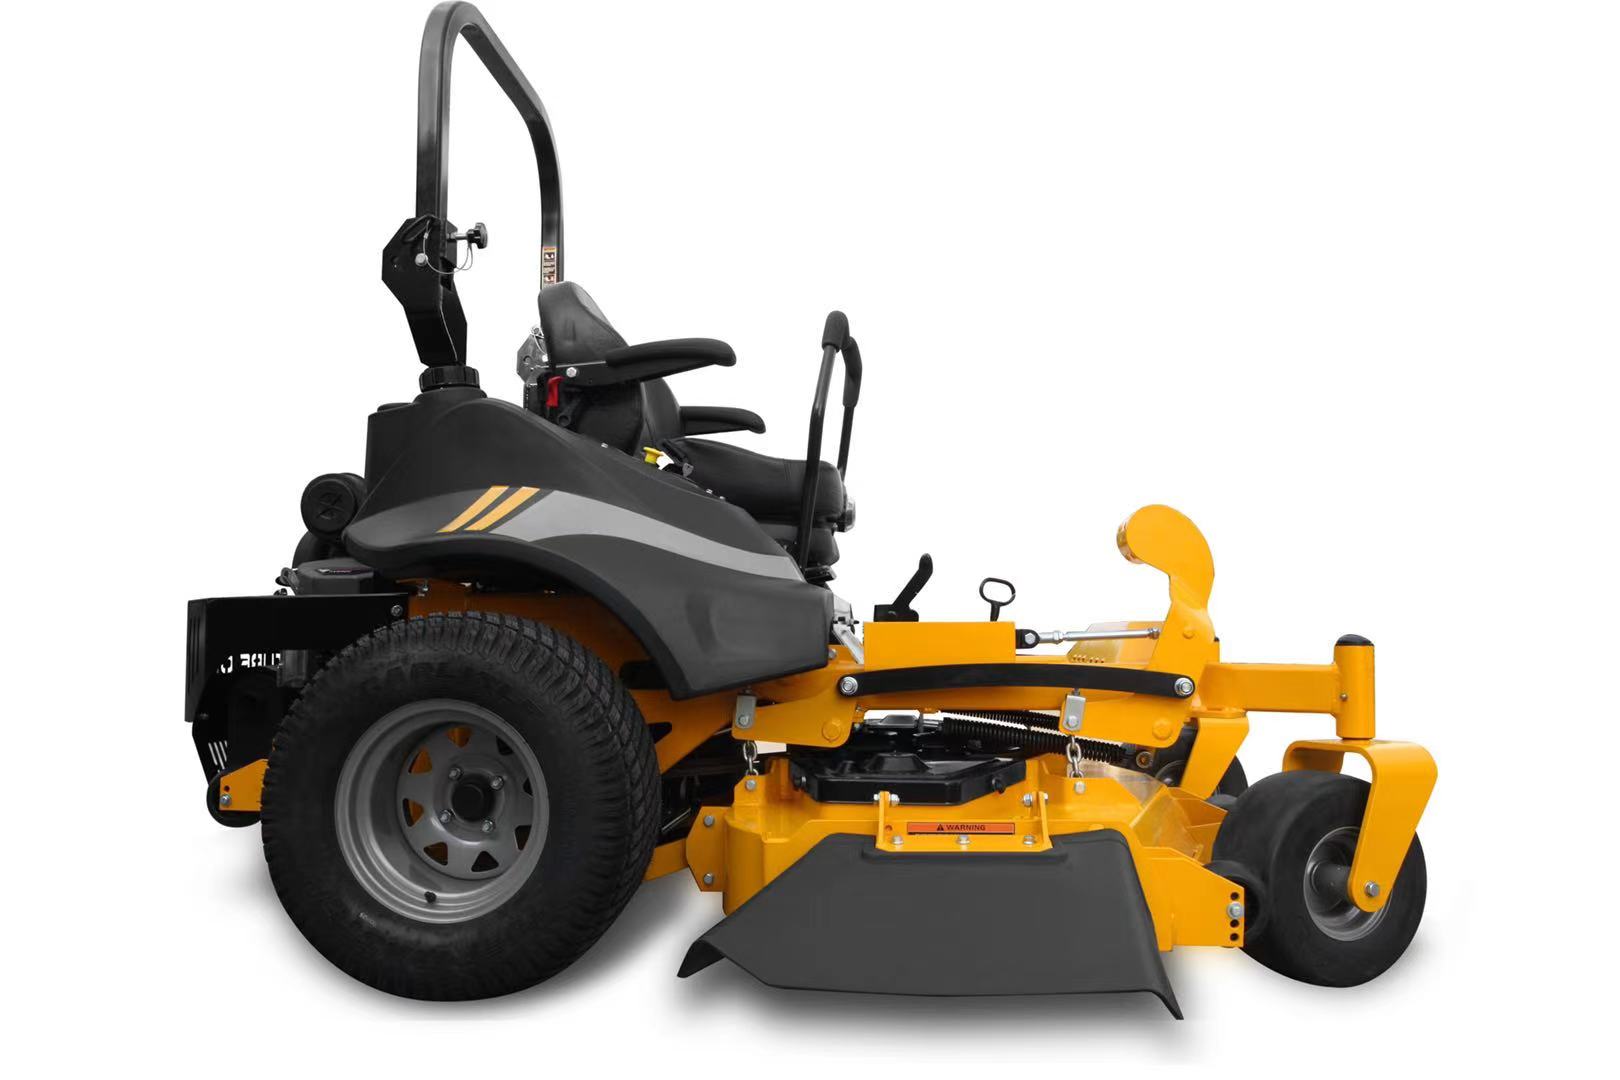 Building on the Explorer platform, we wanted to build another line of commercial mowers with speed and agility in mind. 